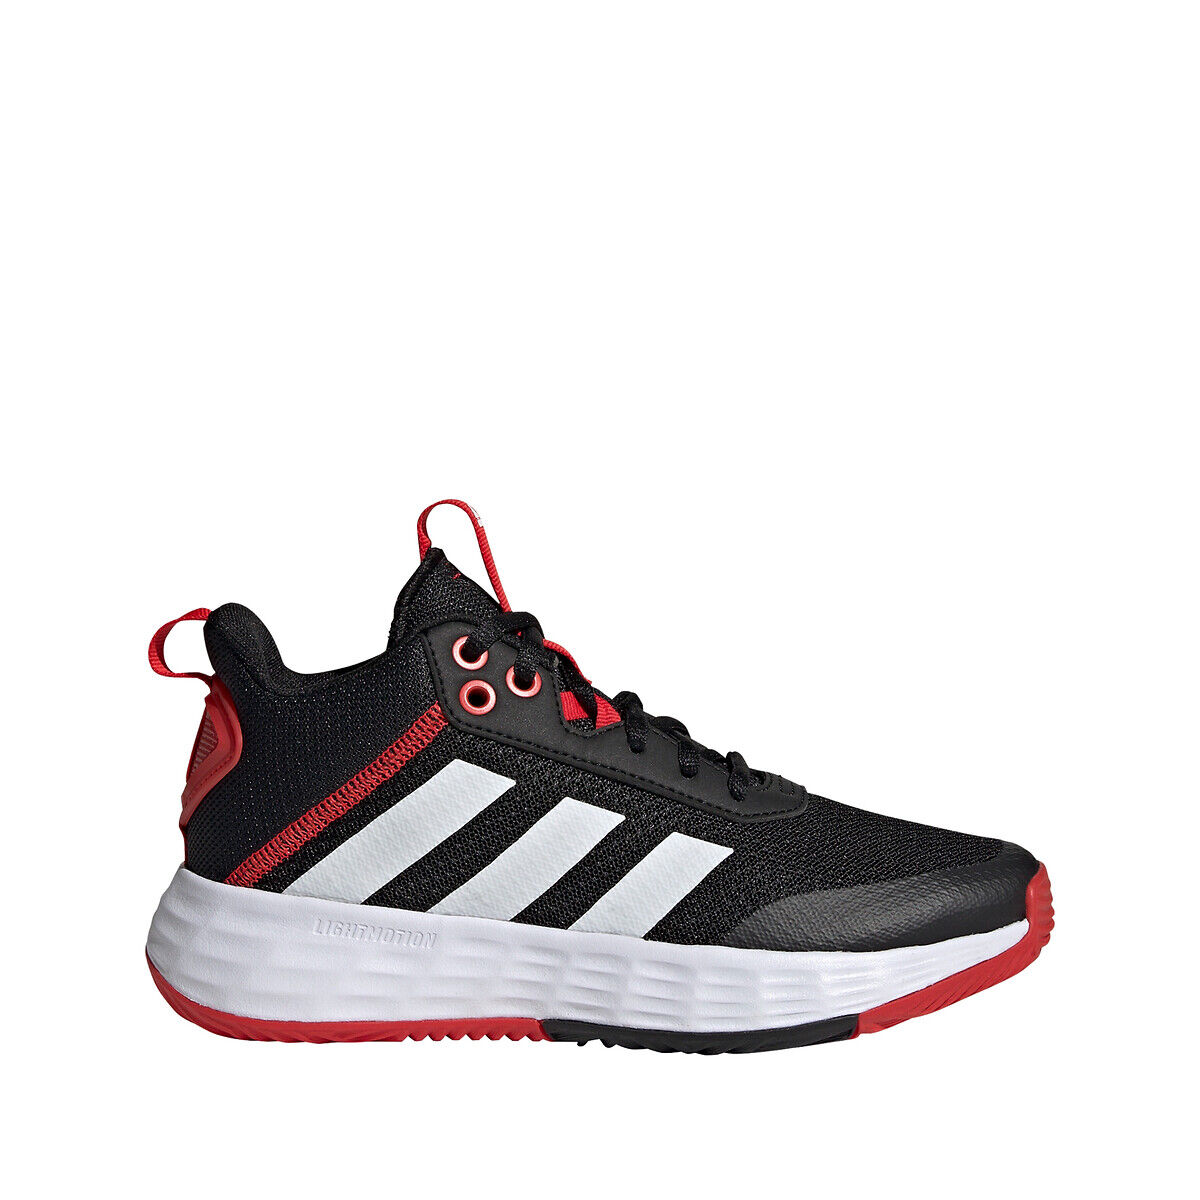 adidas Performance Baskets Ownthegame